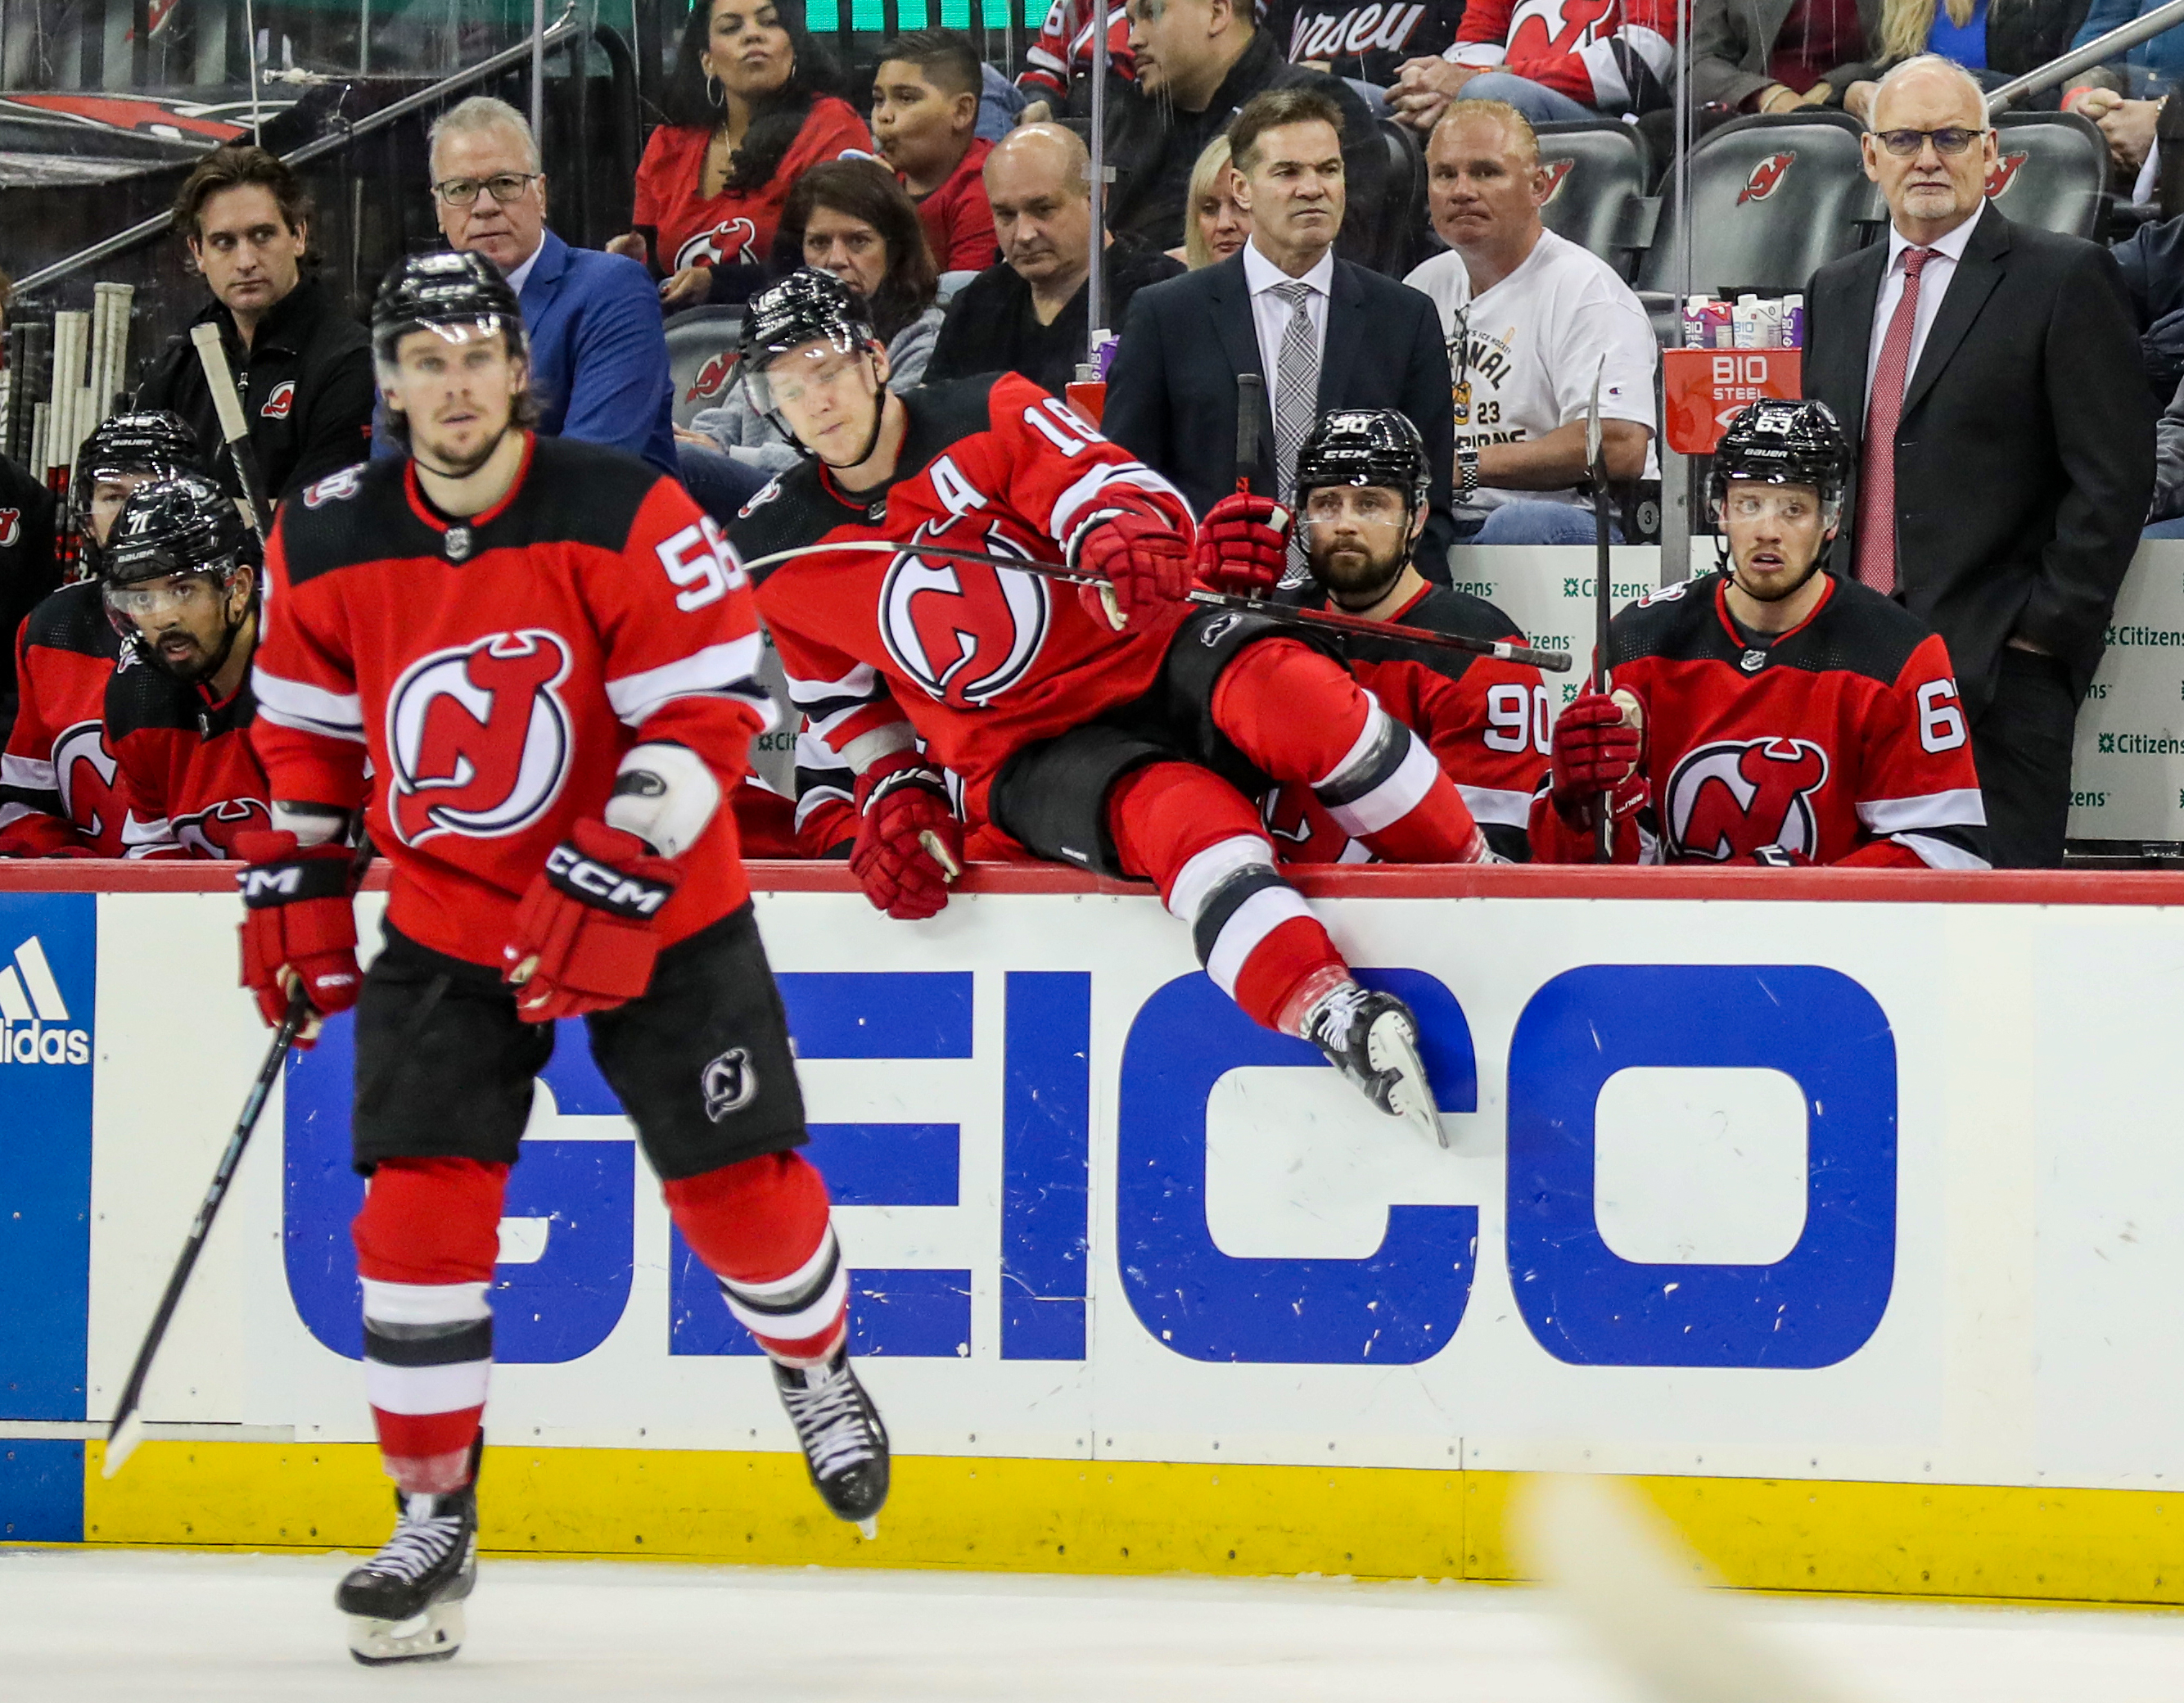 Lindy Ruff blames himself as Devils fail to clinch playoff spot in